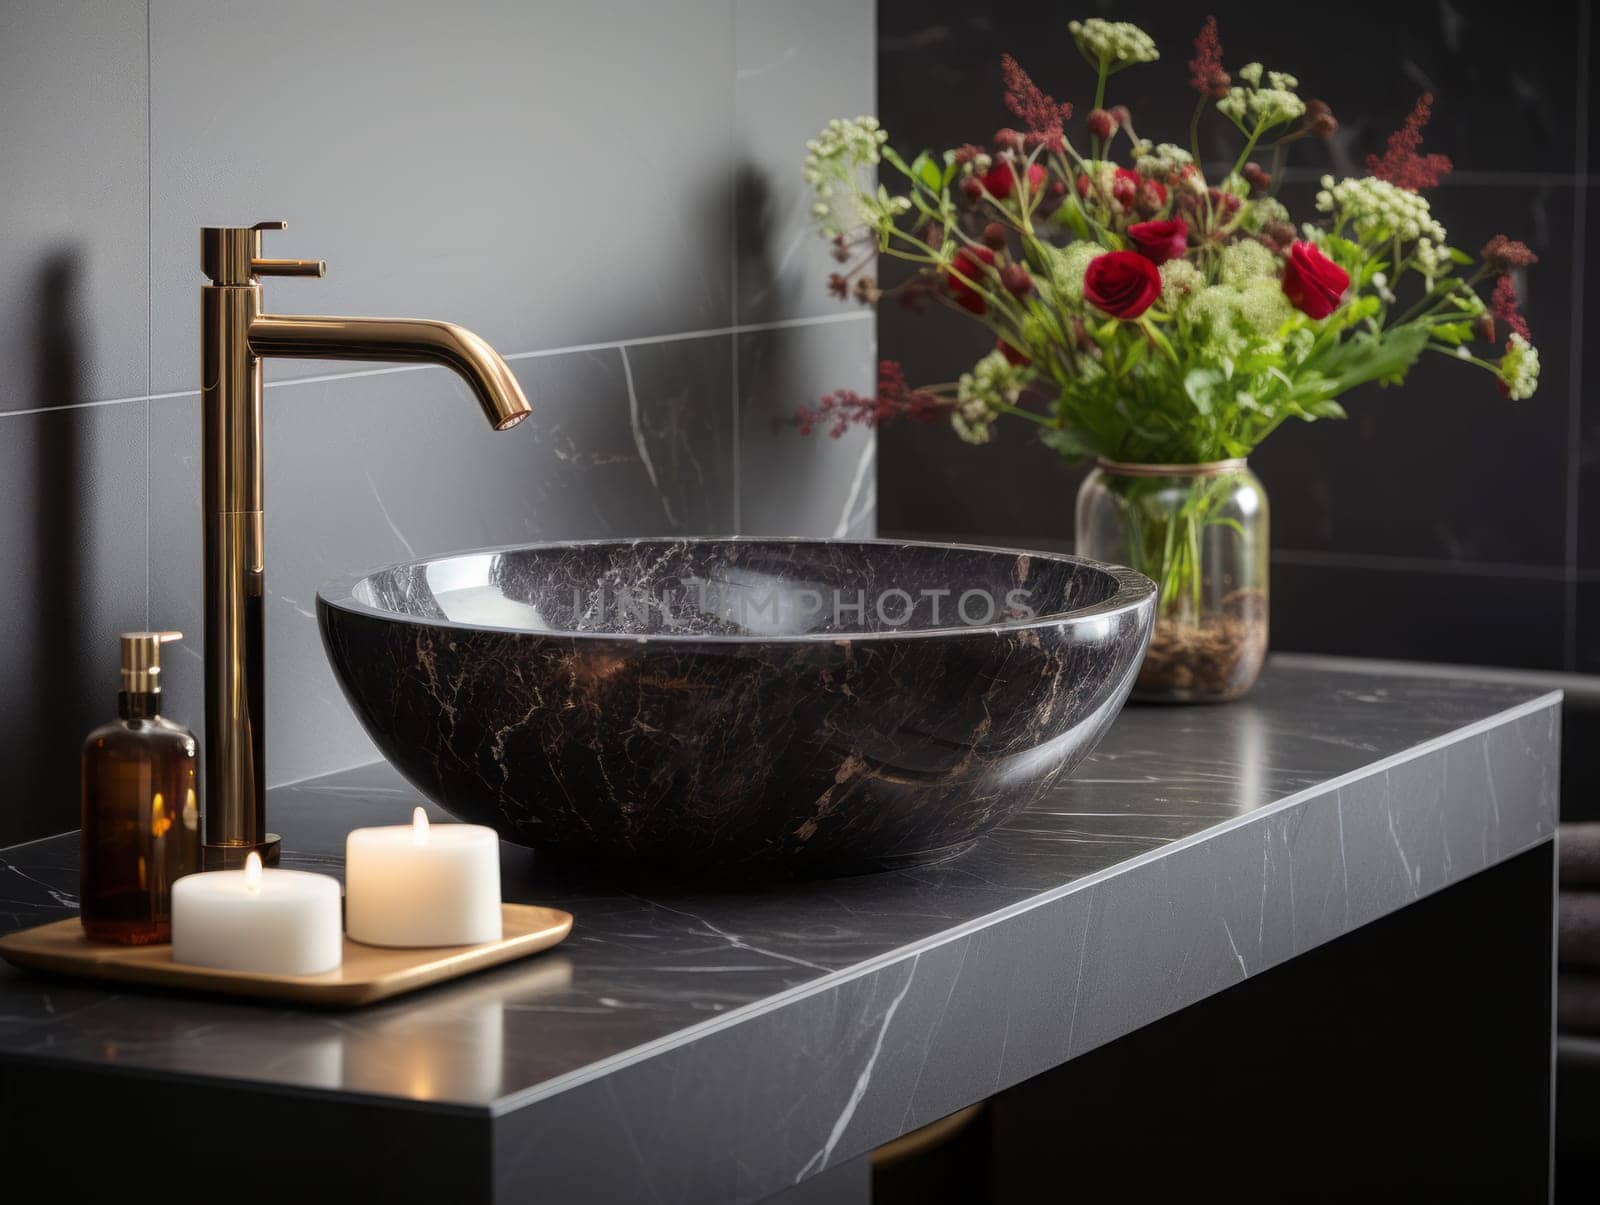 Stylish black marble vessel sink and chrome faucet. Interior design of modern bathroom.